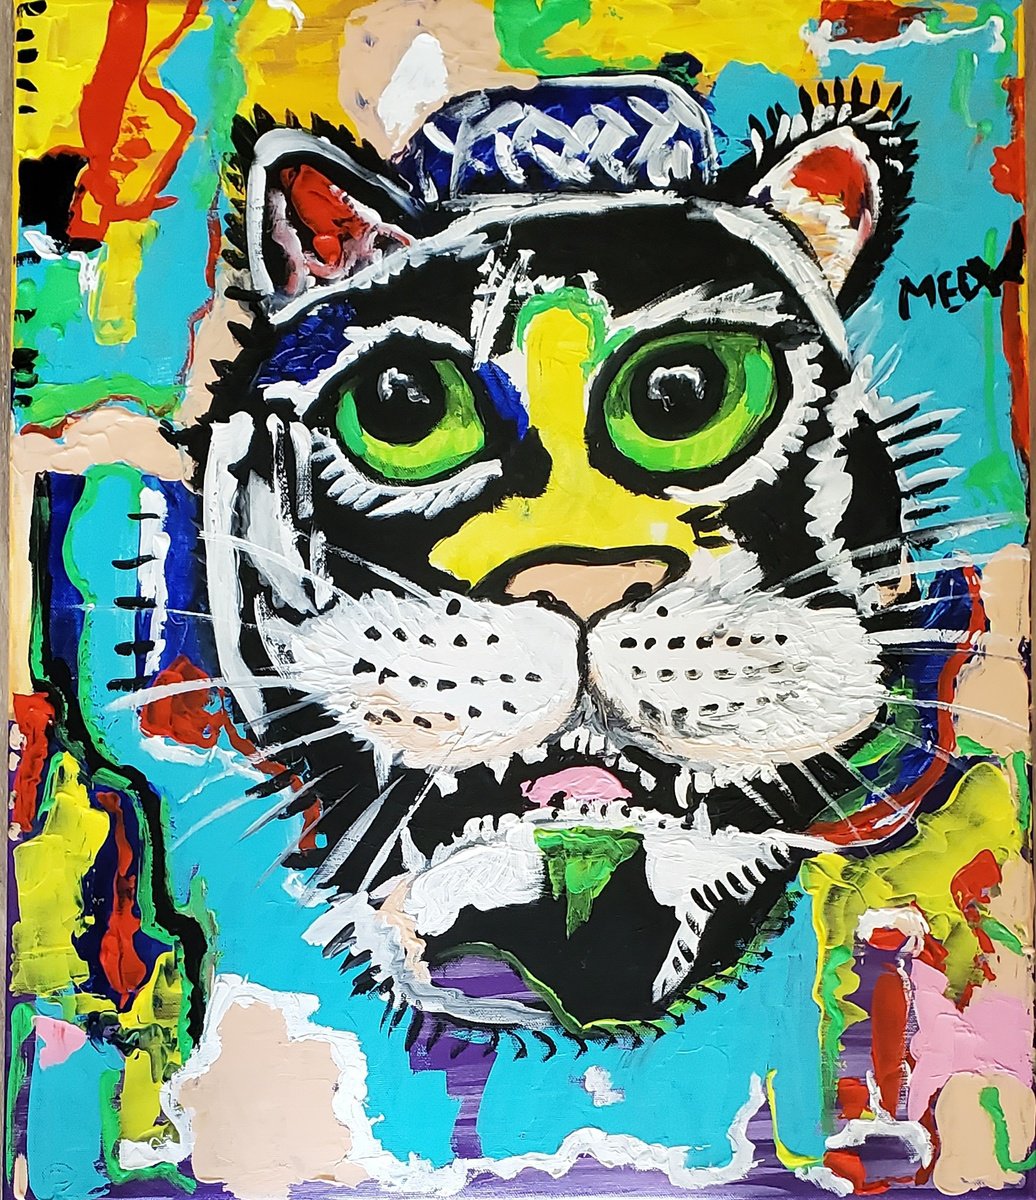 UNTITLED cat version of famous painting by Jean-Michel Basquiat. by Olga Koval